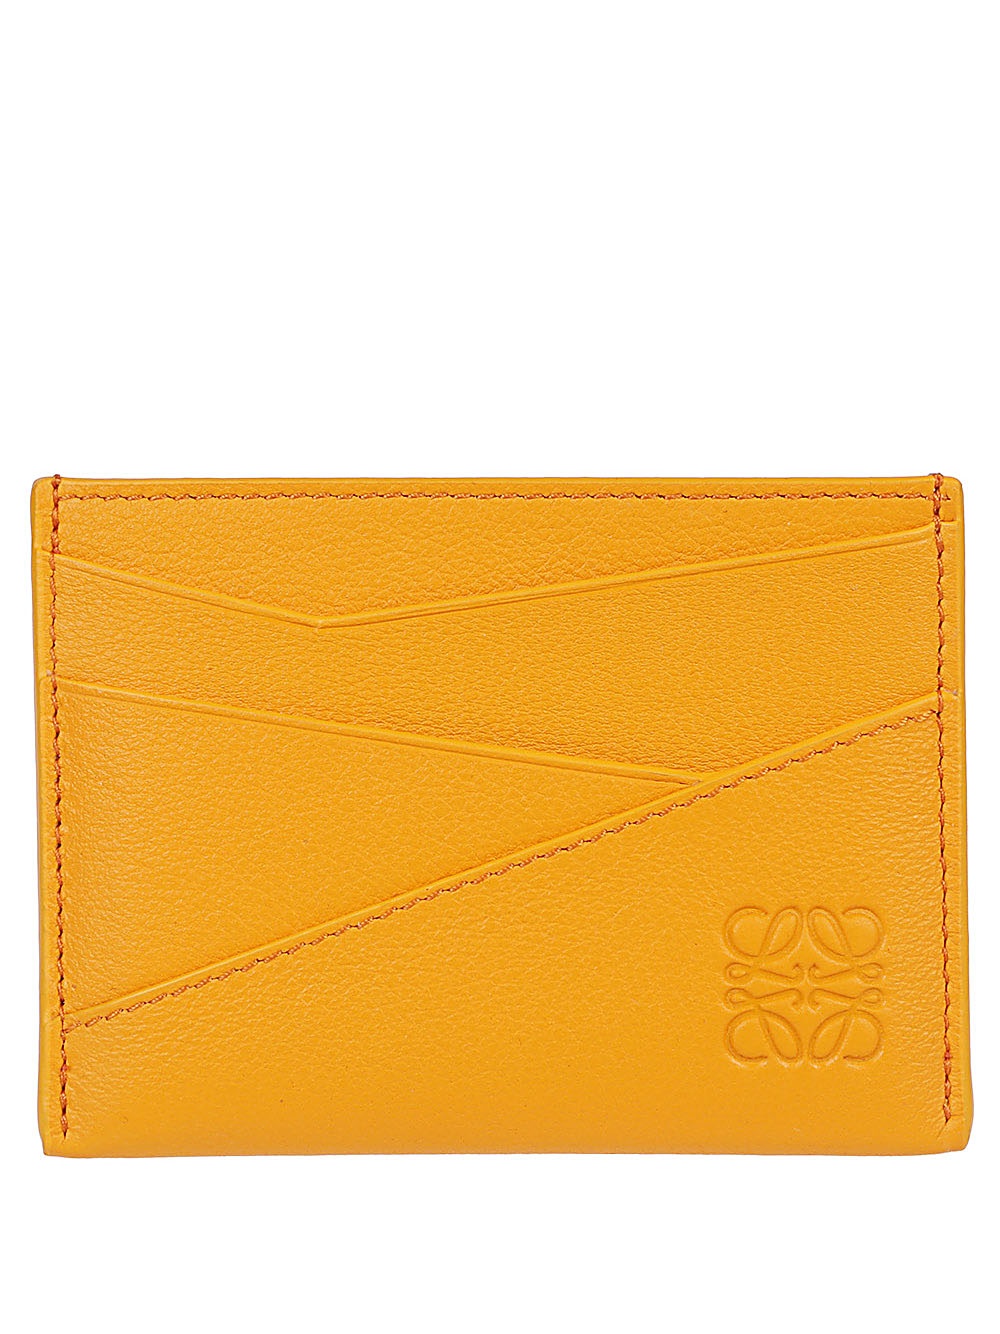 Credit card holder with logo - 1